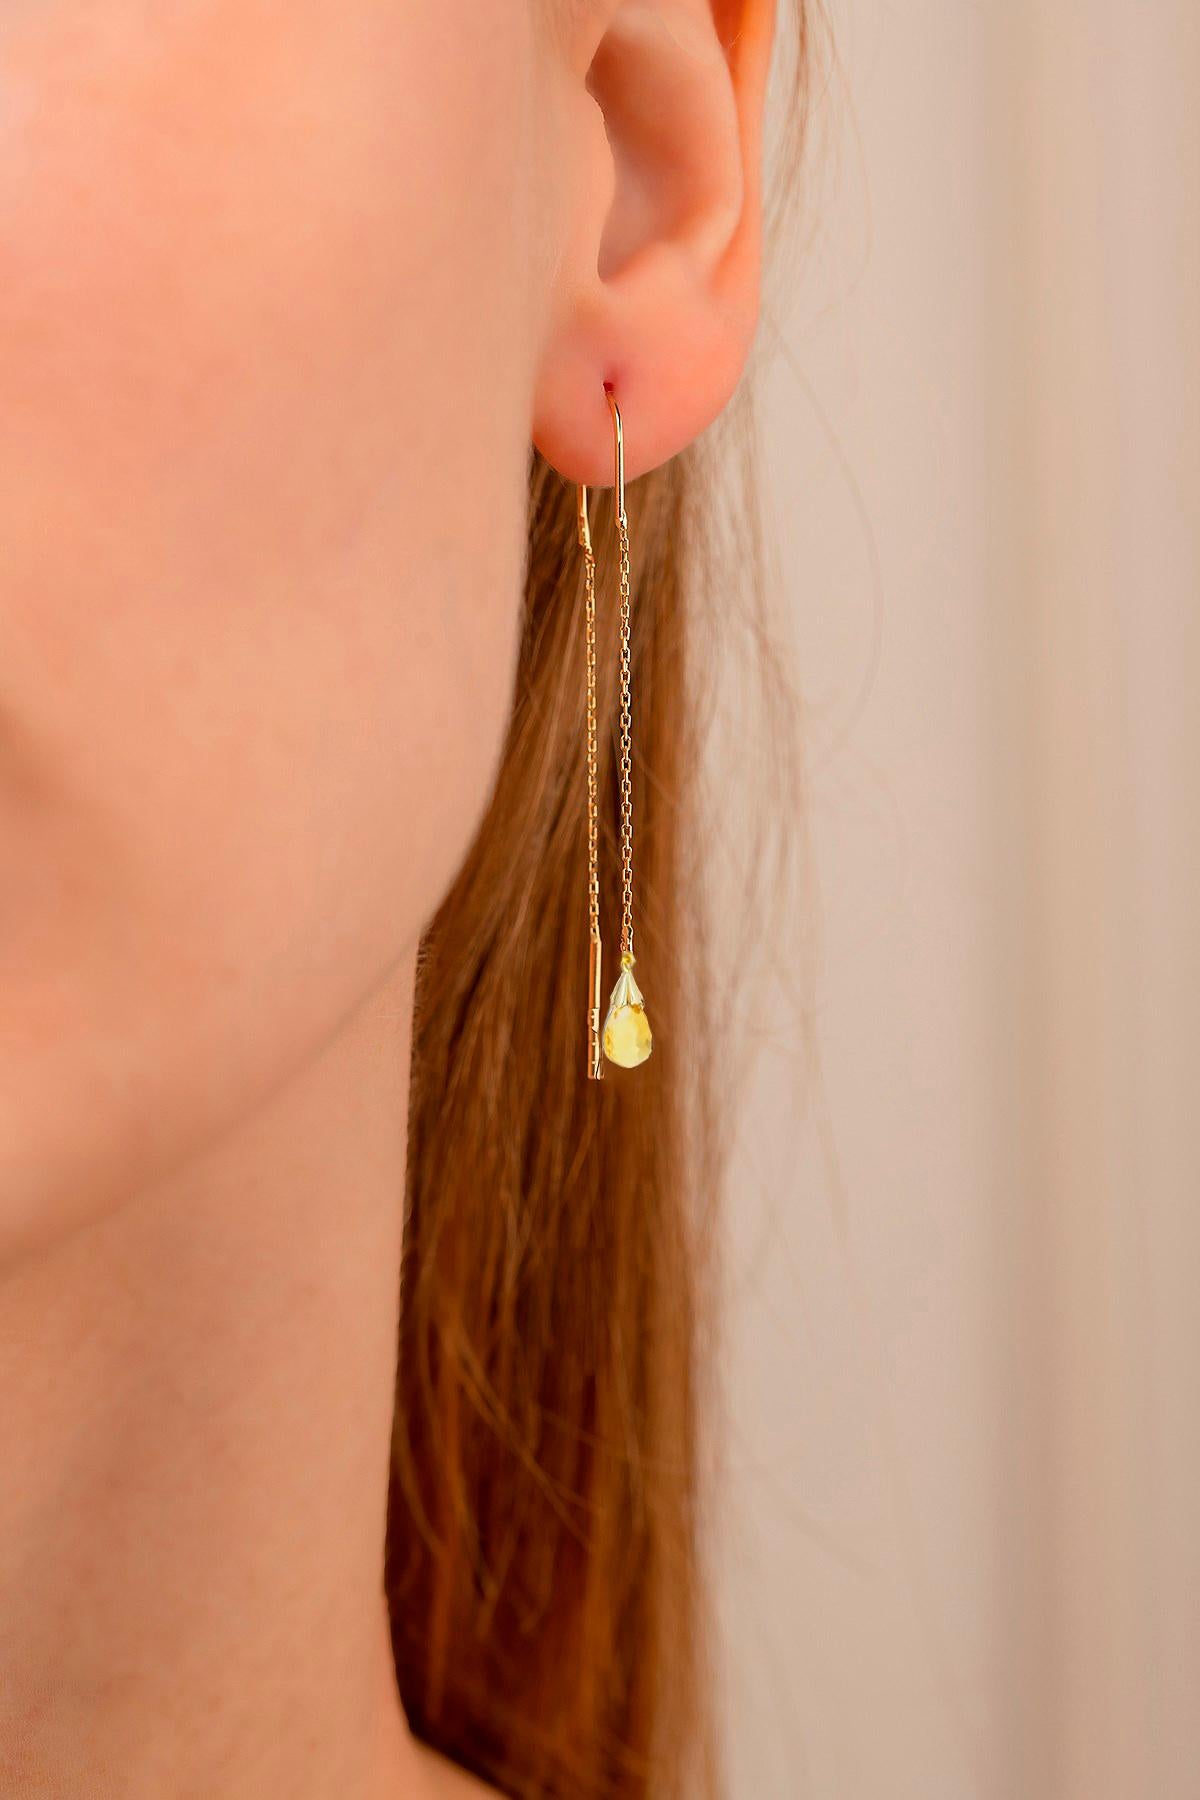 14 k yellow gold Threader earrings with citrines. 
Thin Cable Chain citrine earrings. U Shape Ear Threaders. Everyday citrine earrings.

Metal: 14k yellow gold
Weight: 1.81 g.
Size: 13.5 mm (4mm - chain + 9.5 mm pendant).

Set with cirines, color -